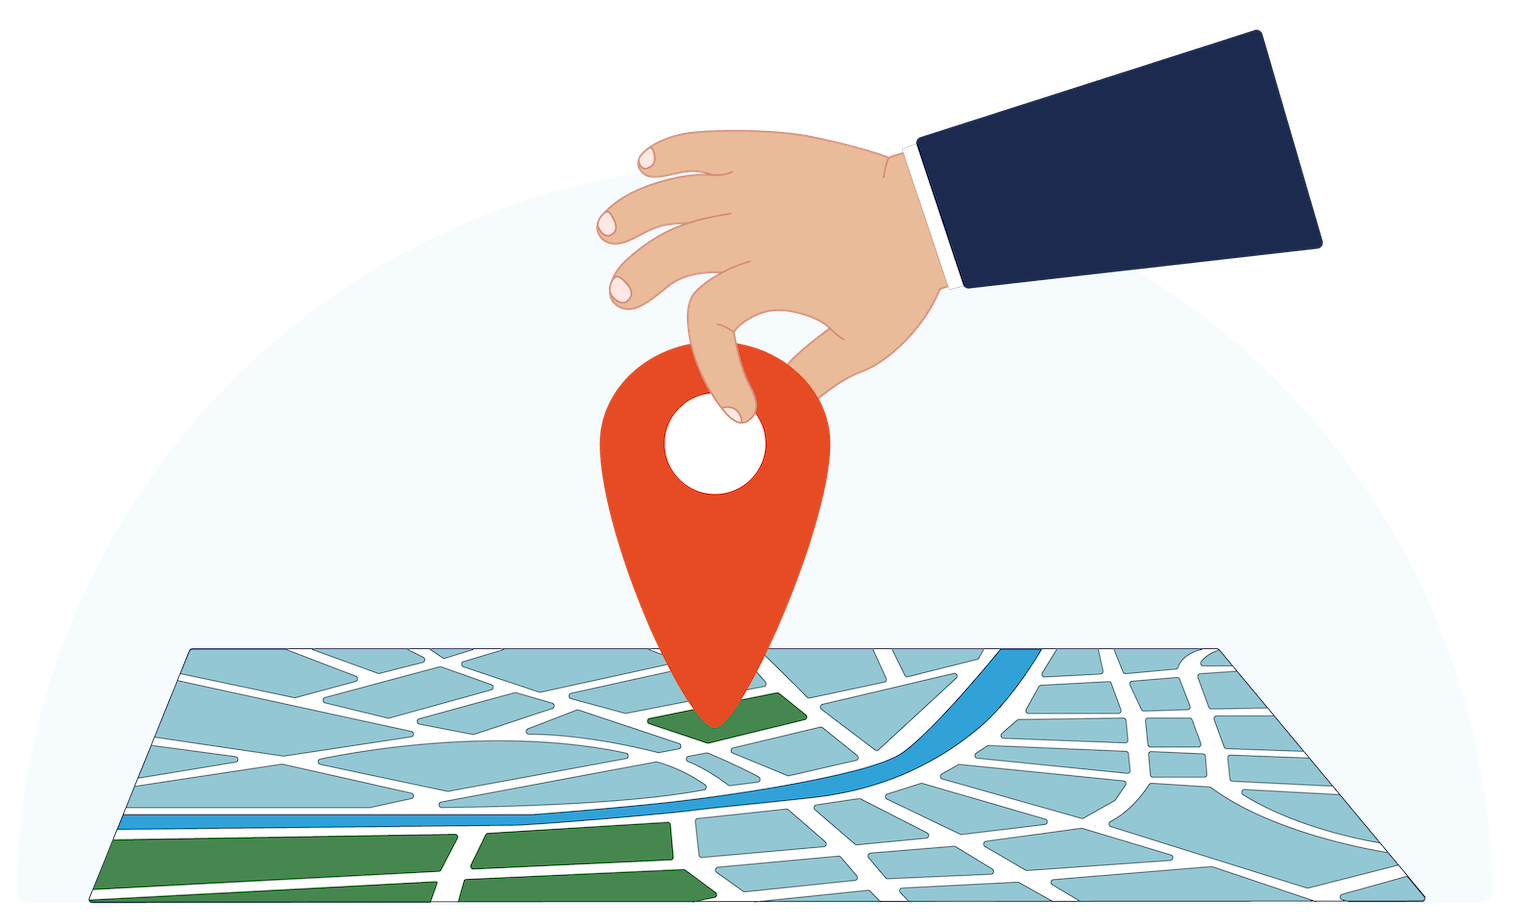 Illustration of hand placing a location tag on a map.